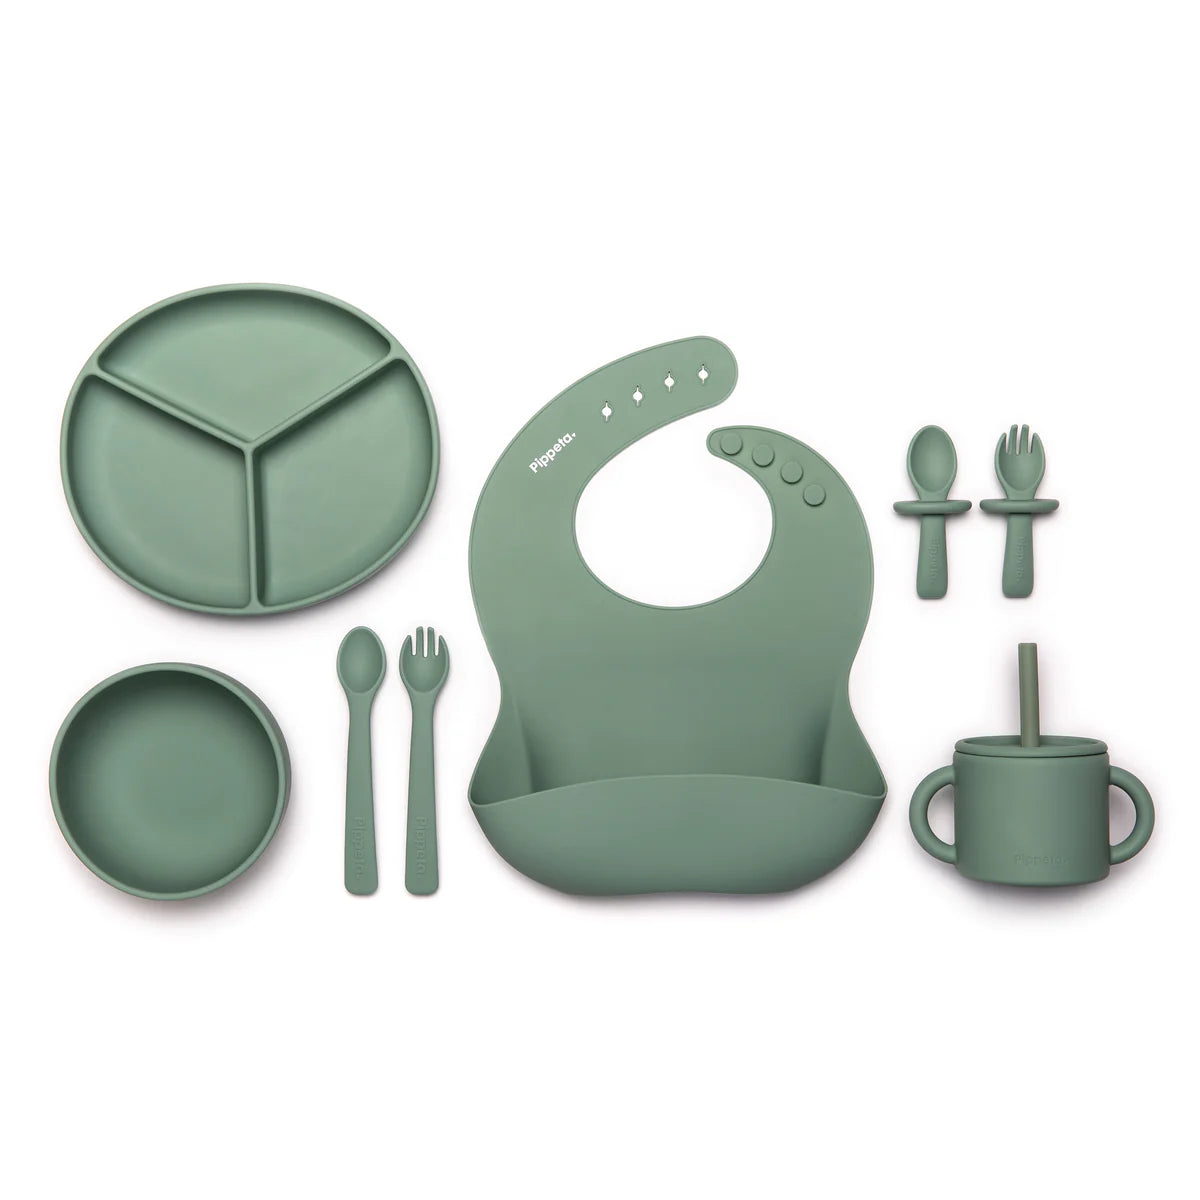 Ultimate Weaning Set